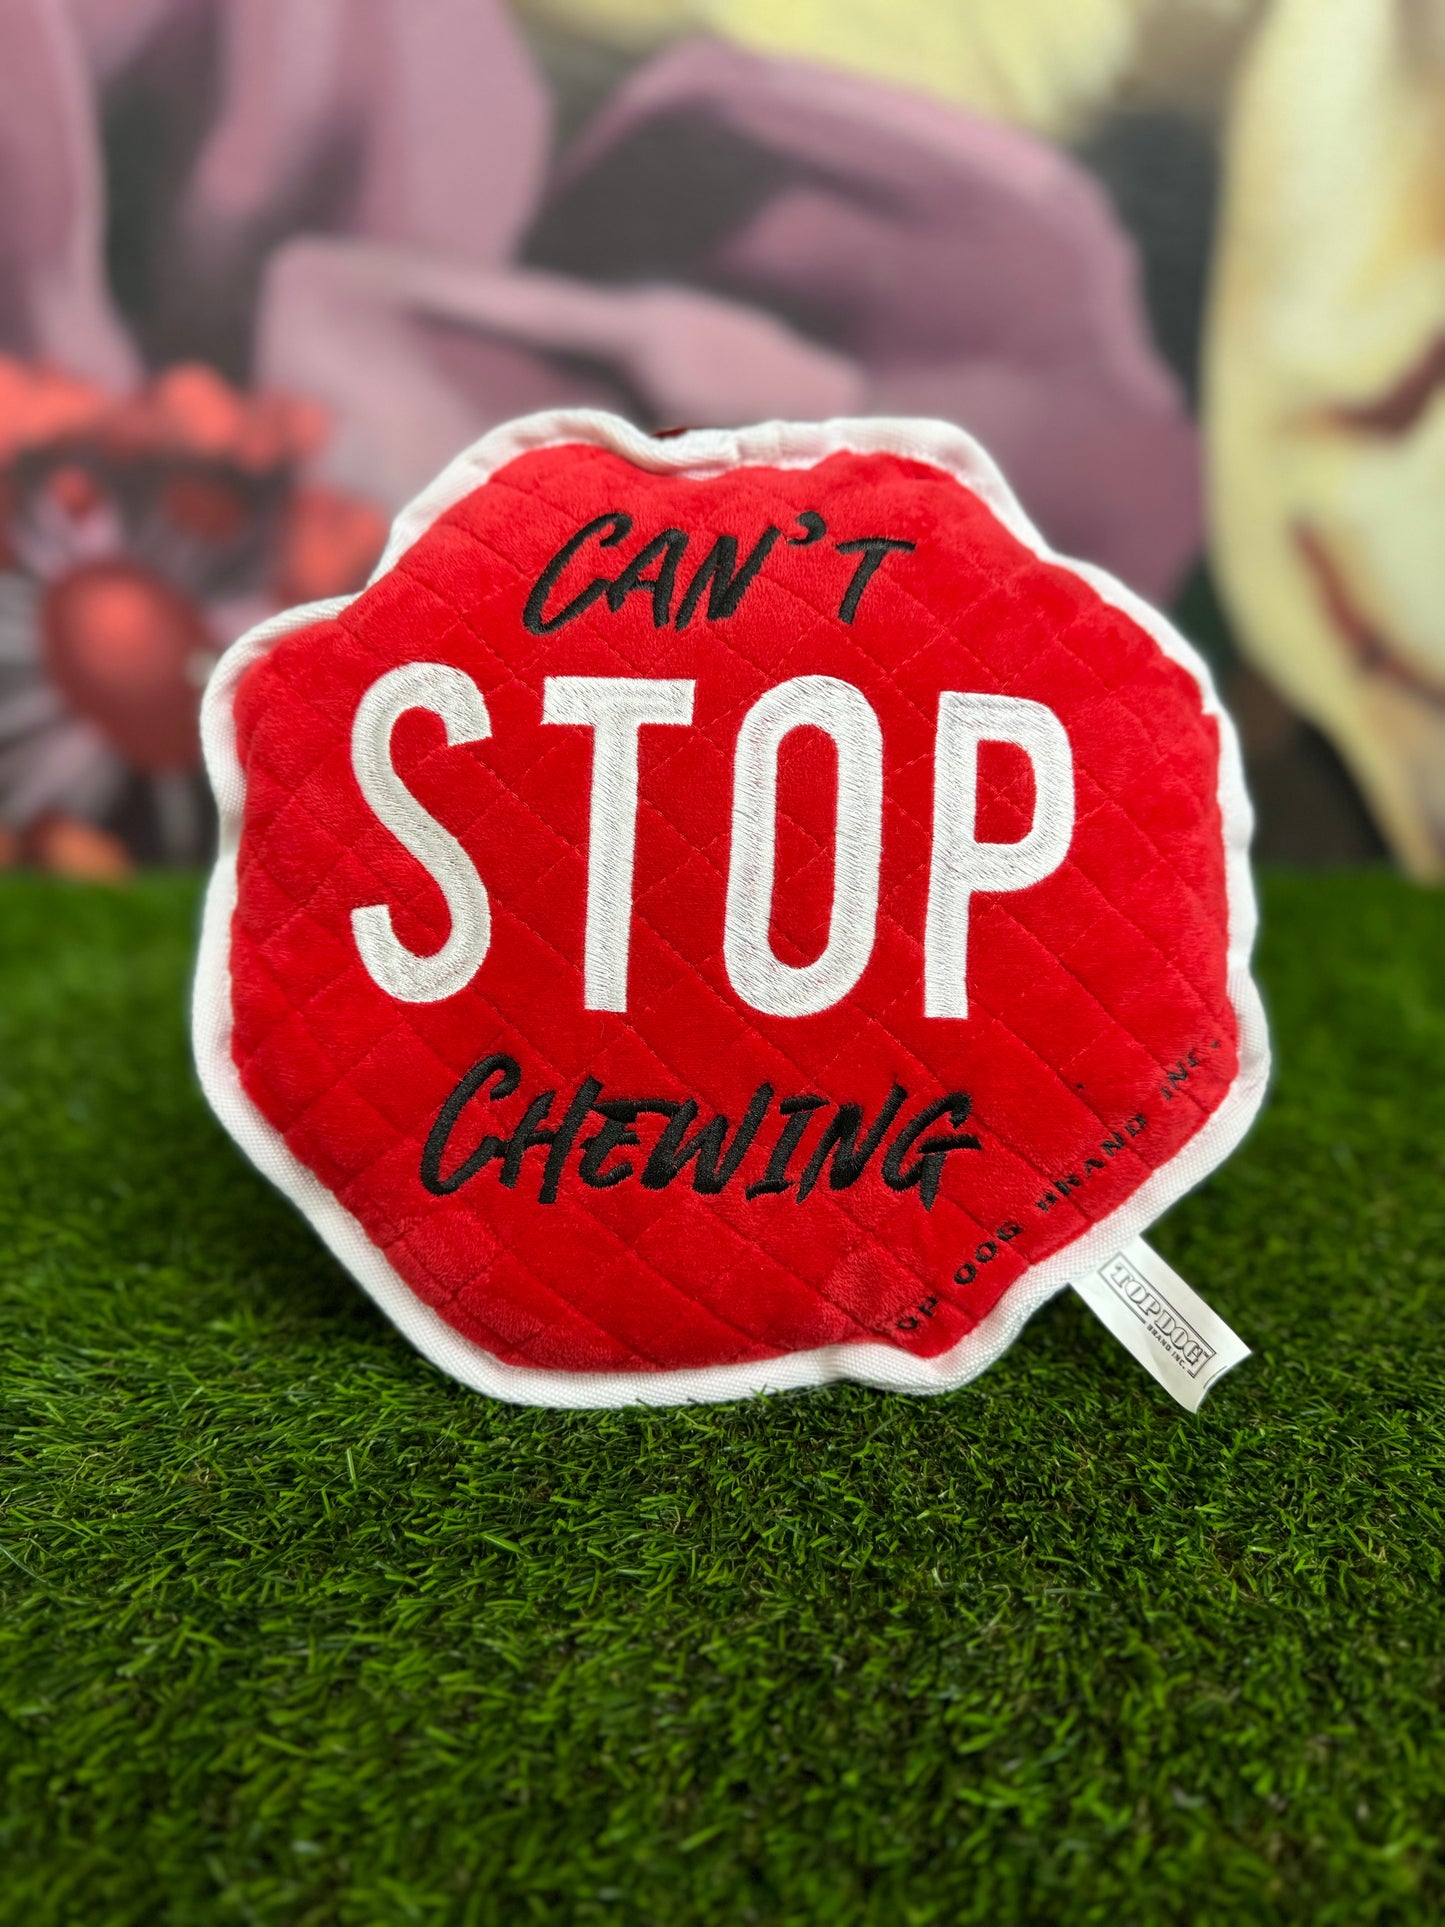 Can’t stop chewing sign toy